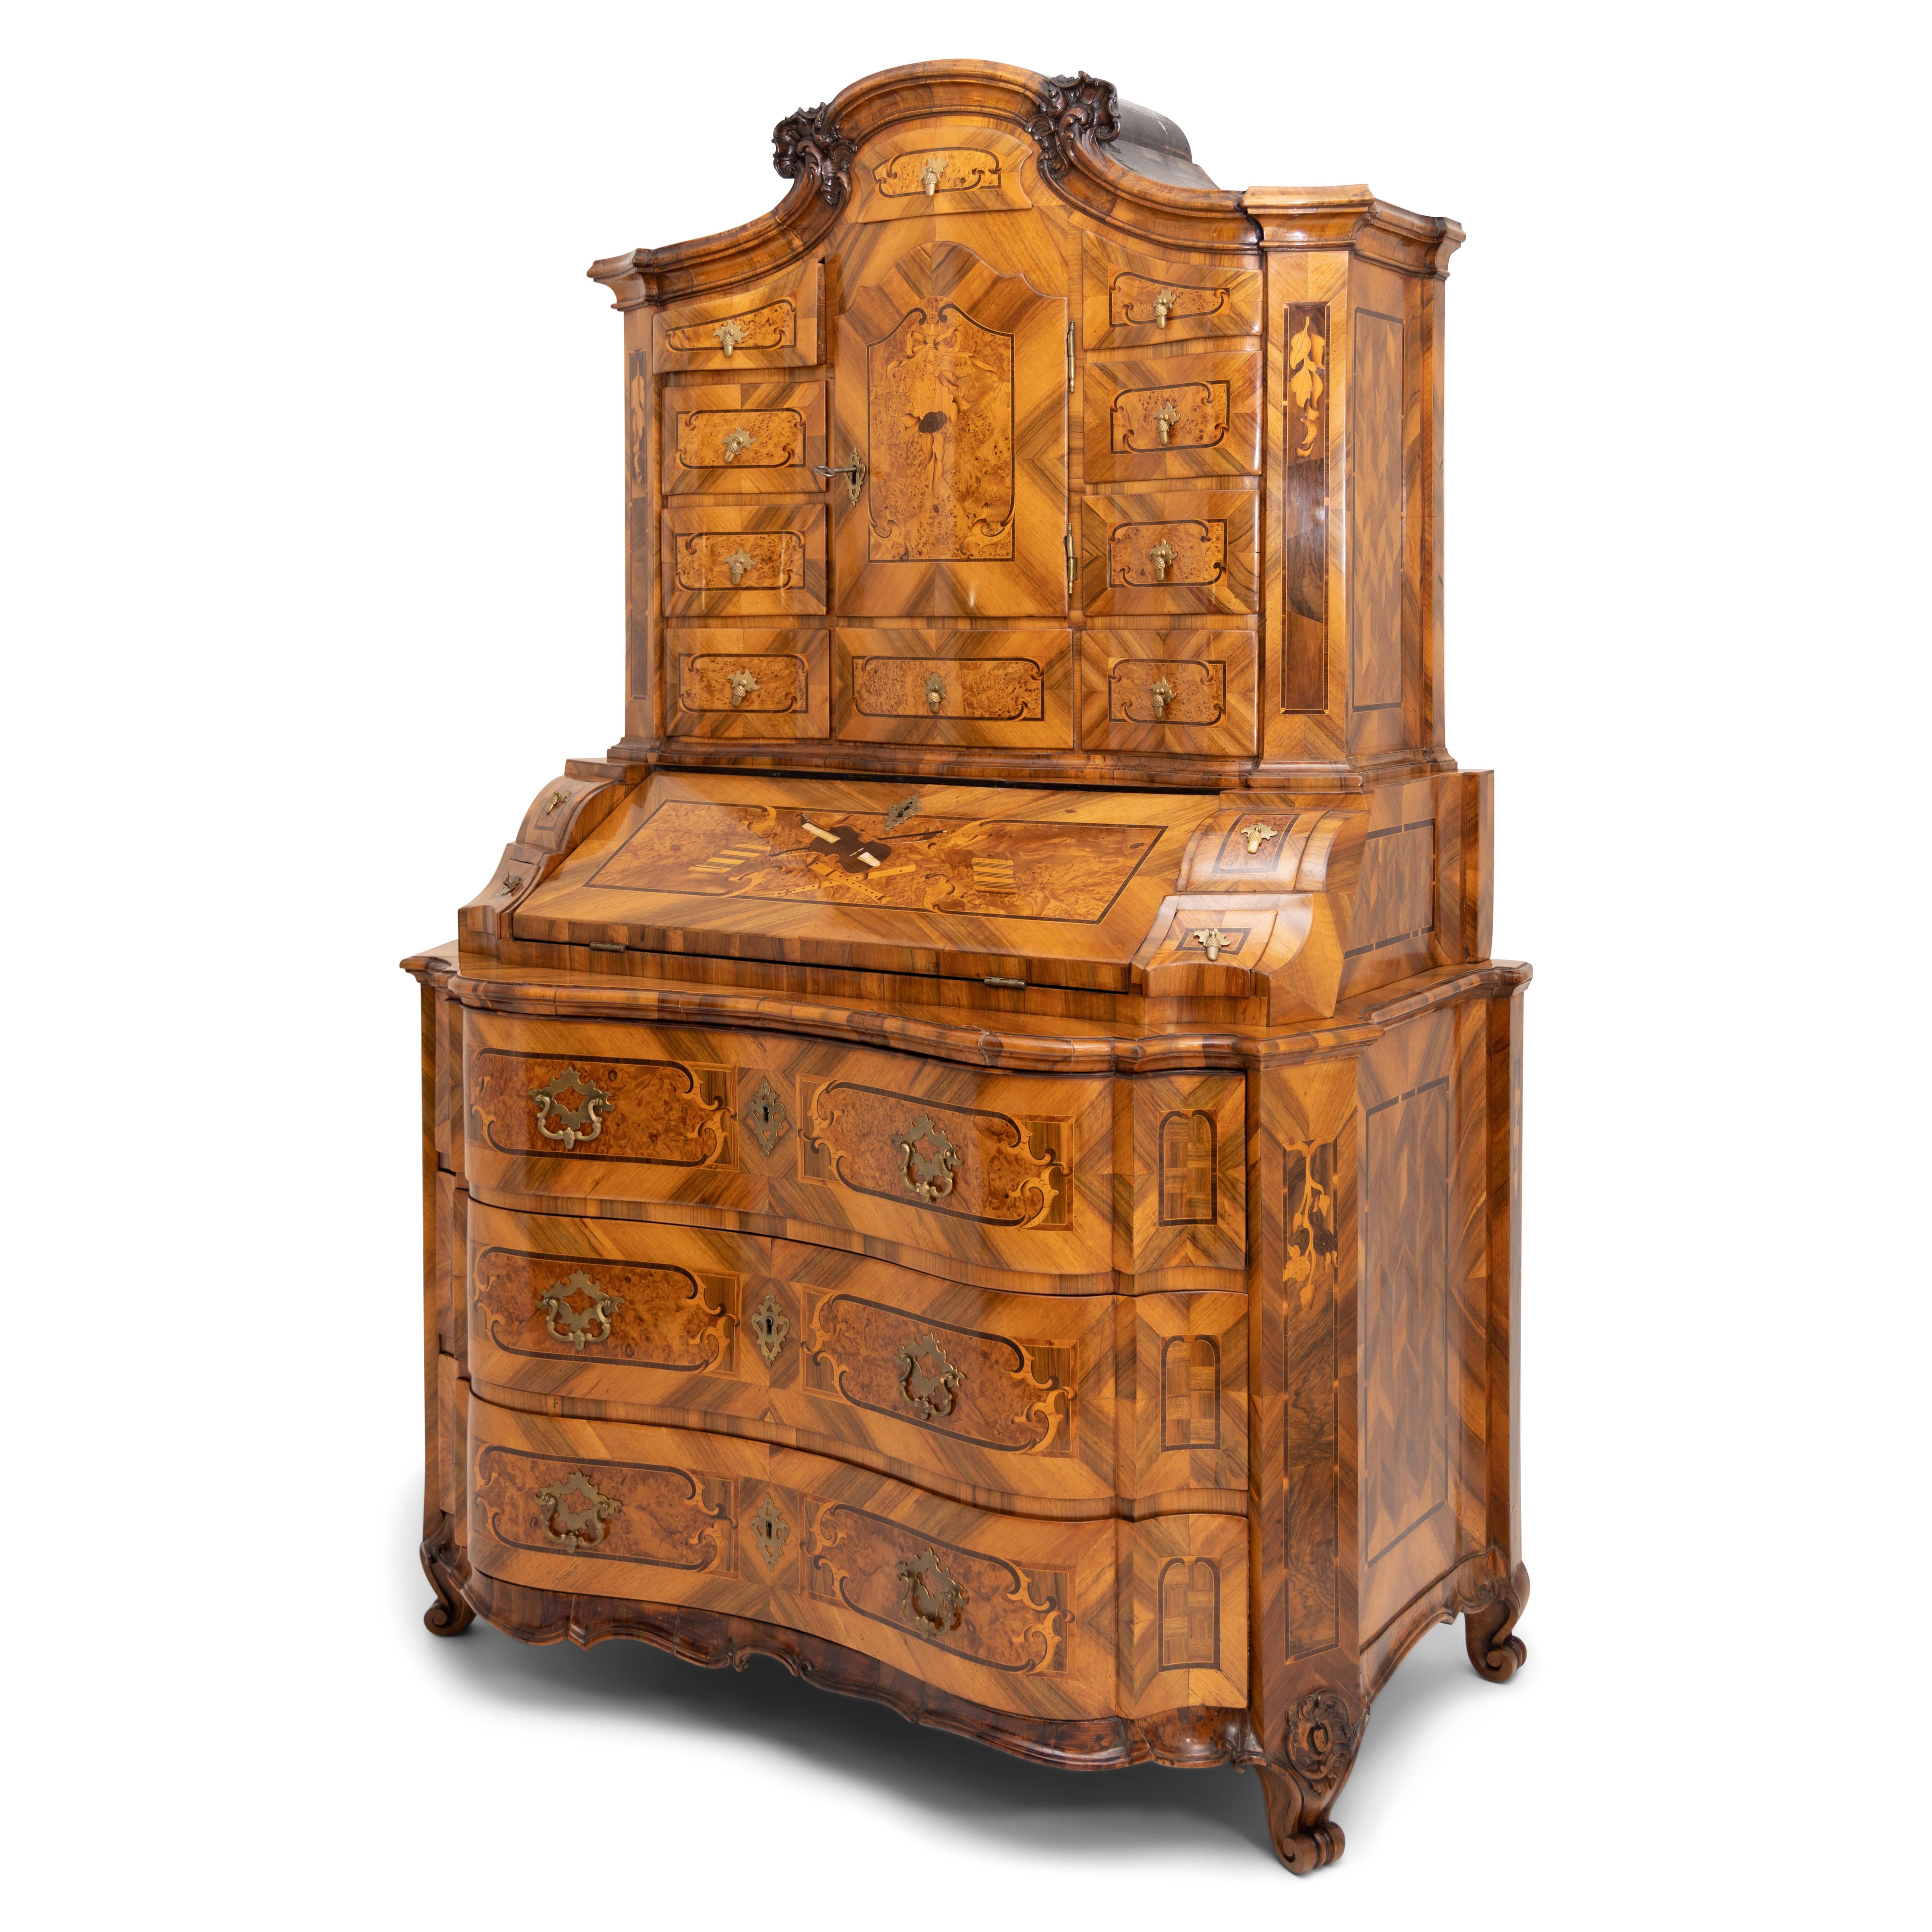 Large Baroque secretaire with a three-drawer chest of drawers in curved form with a wavy skirt. The middle part with a slanted writing flap and four drawers shows a very beautiful marquetry work with violins, flutes and music sheets in different